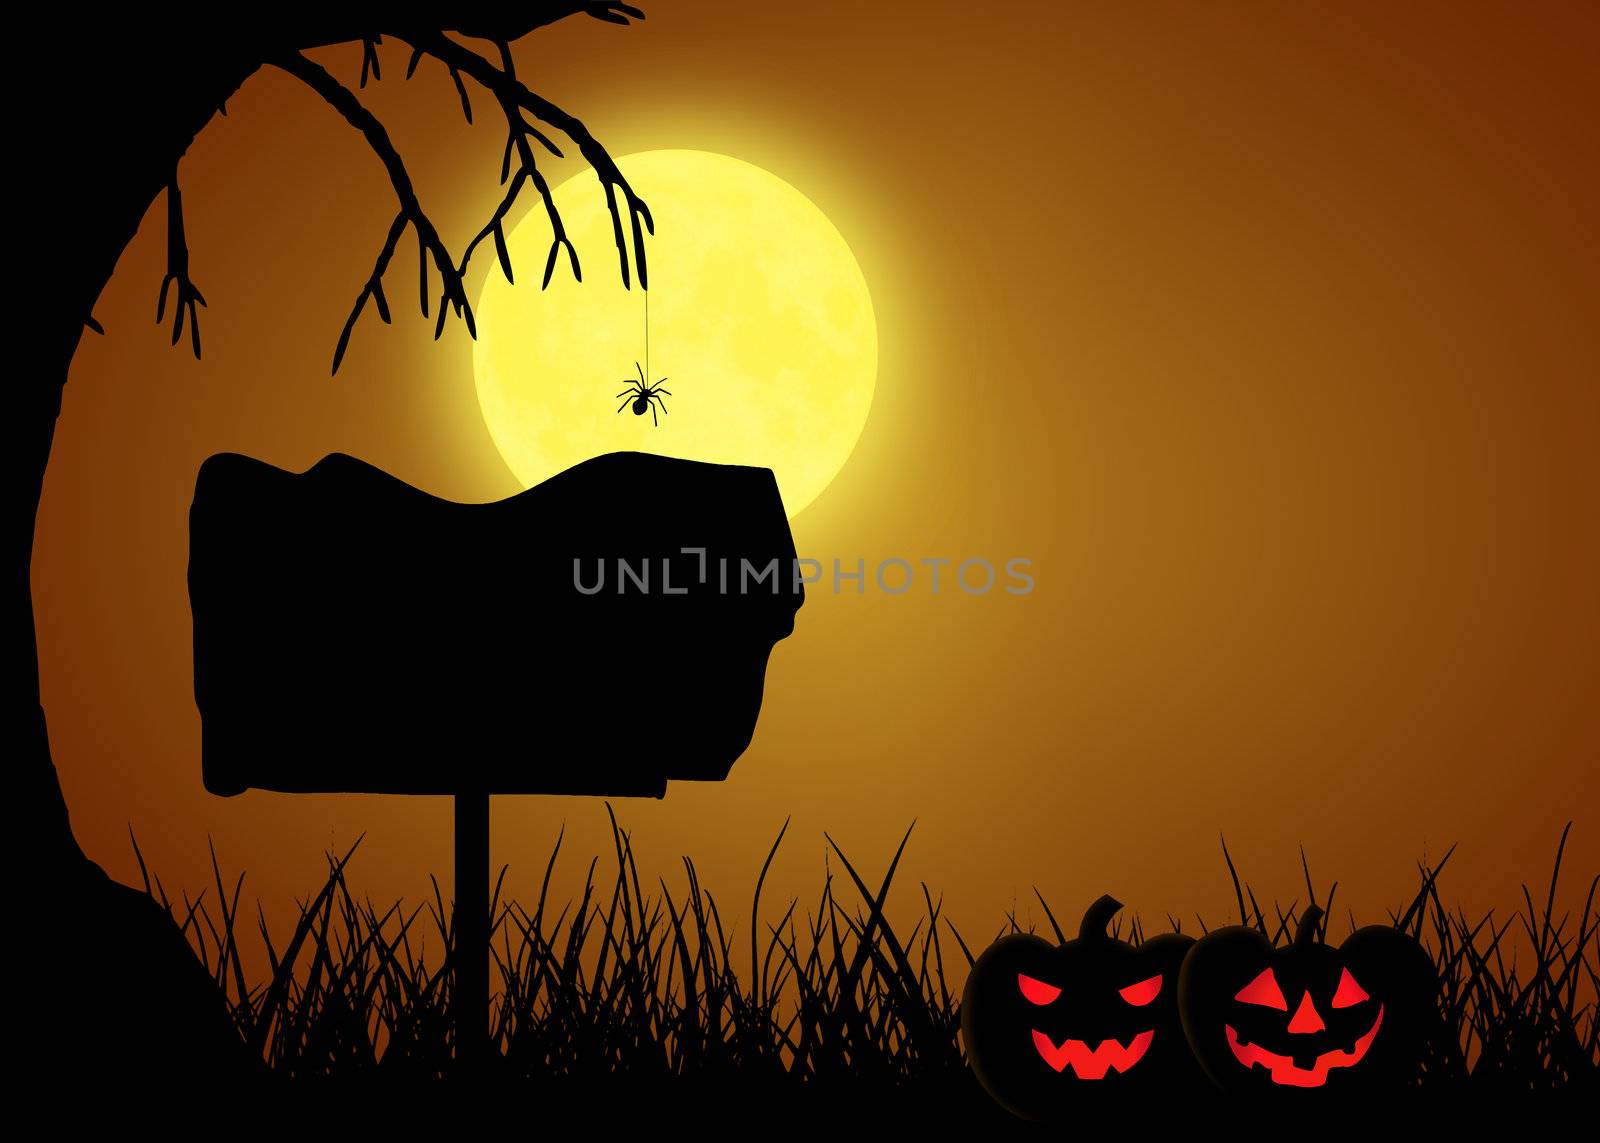 A silhouette Halloween illustration: Scary black landscape with a tree and a spider in front of the full moon,
a sign and two halloween pumpkins.